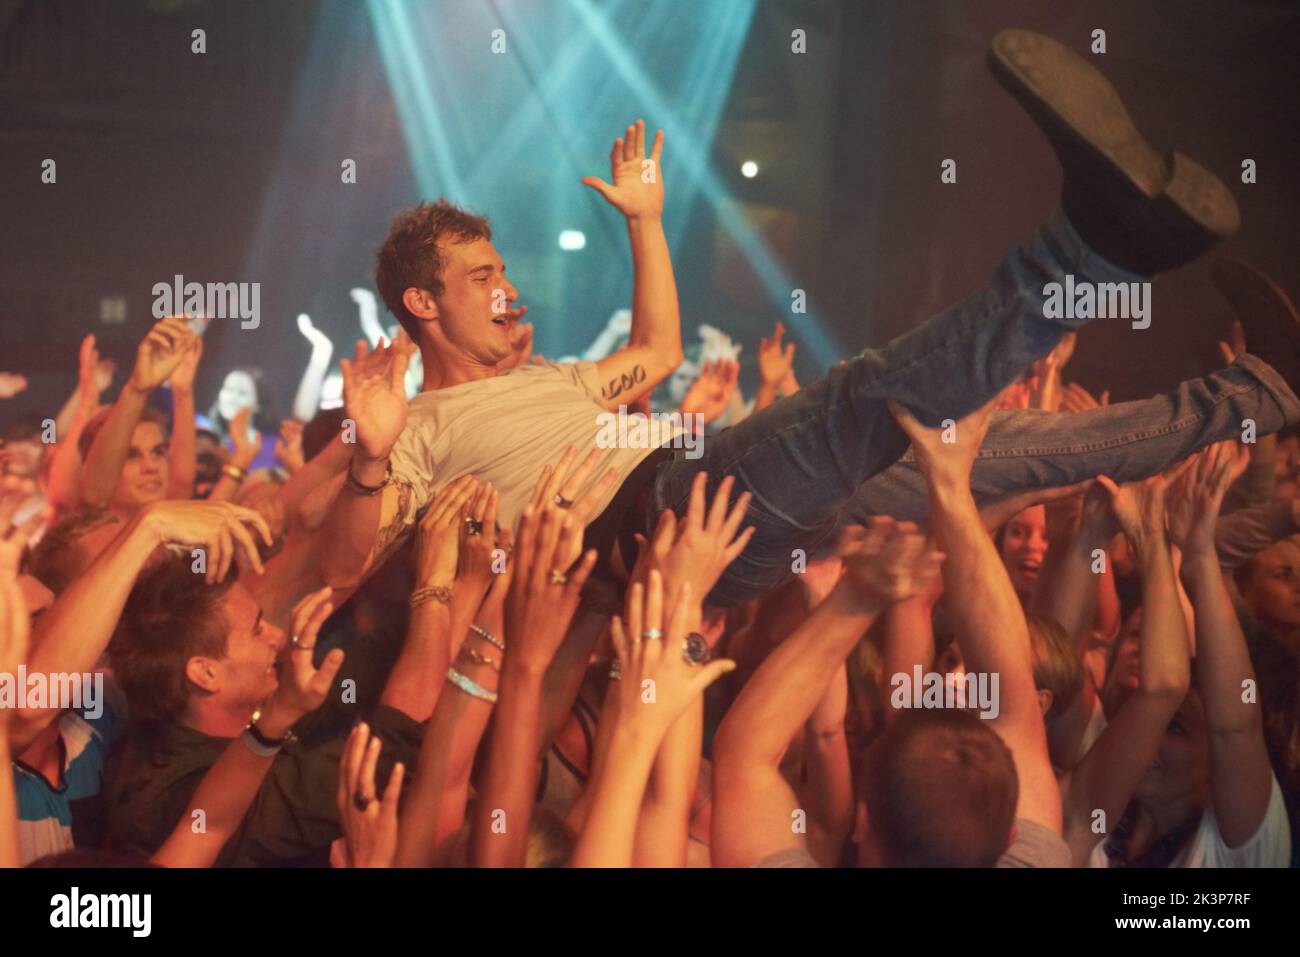 Wild music moves. a man crowd surfing at a music festival. Stock Photo